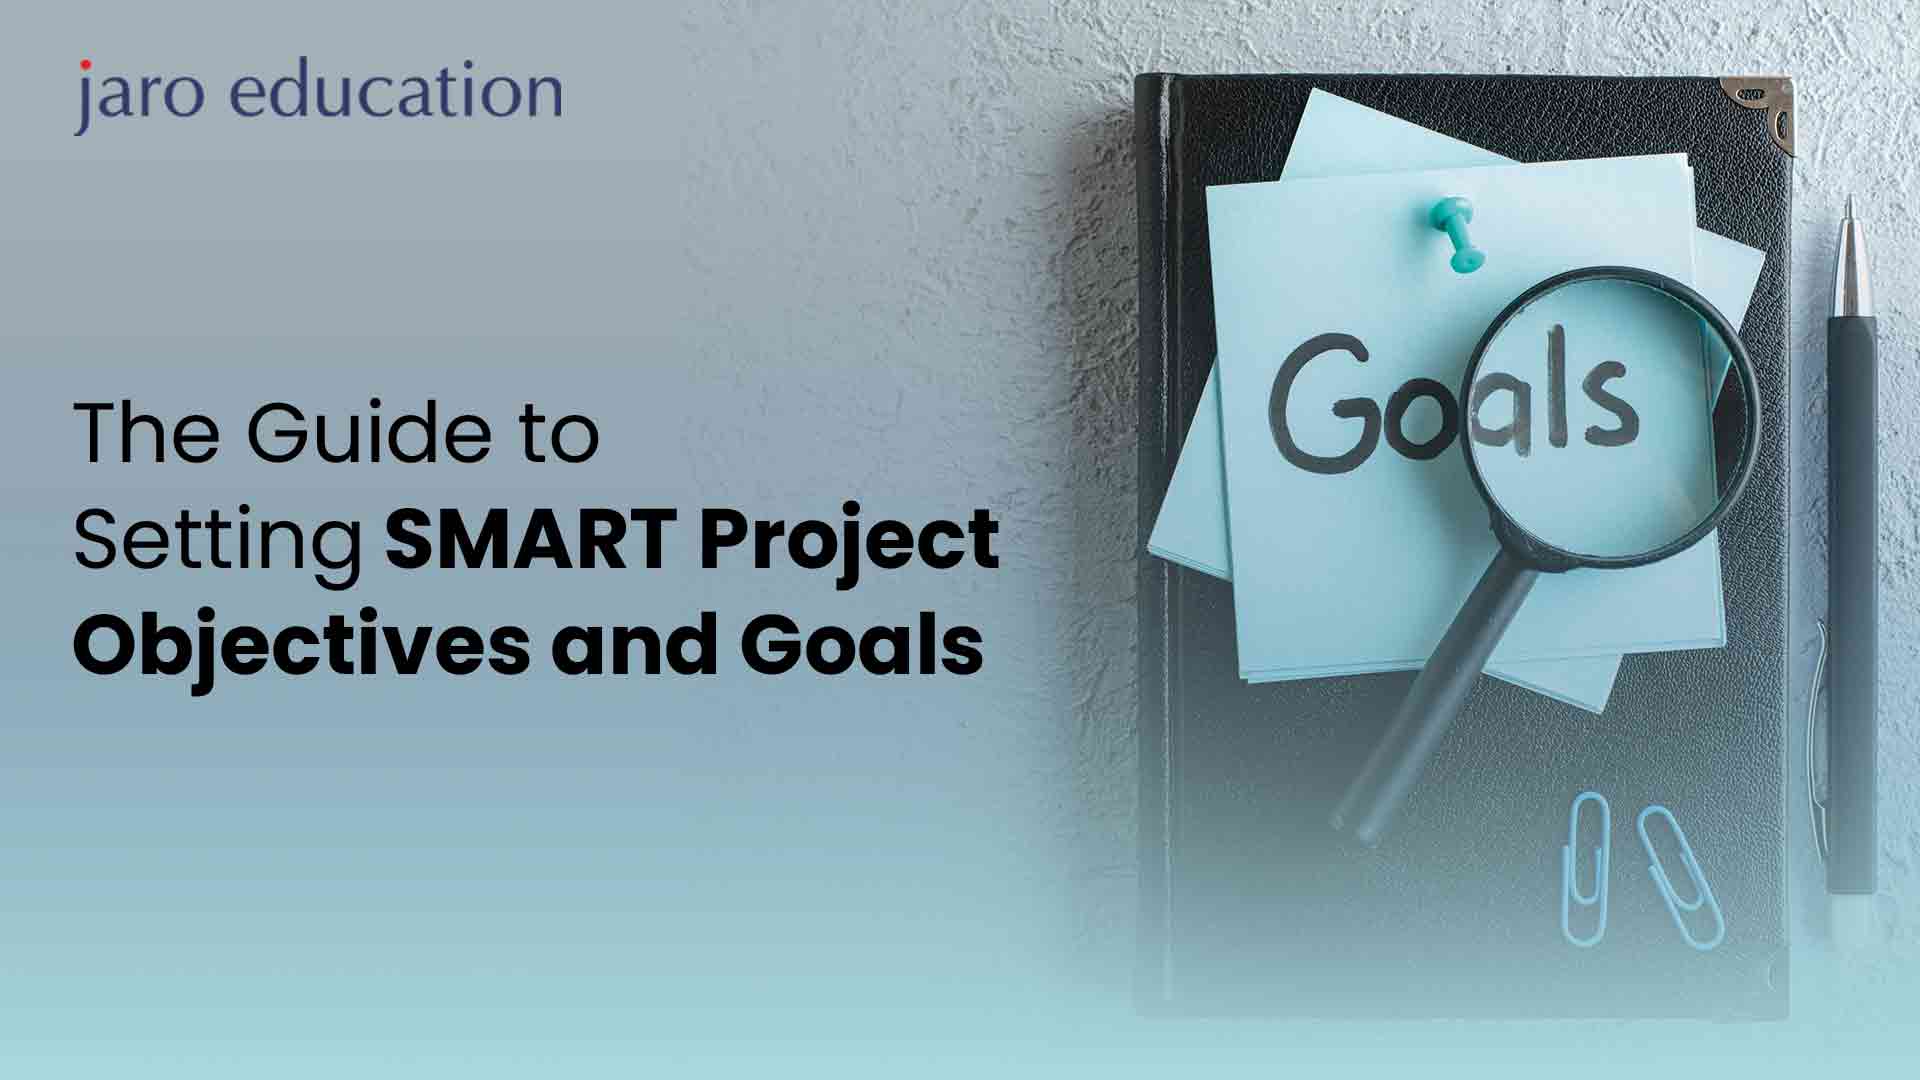 The Guide to Setting SMART Project Objectives and Goals